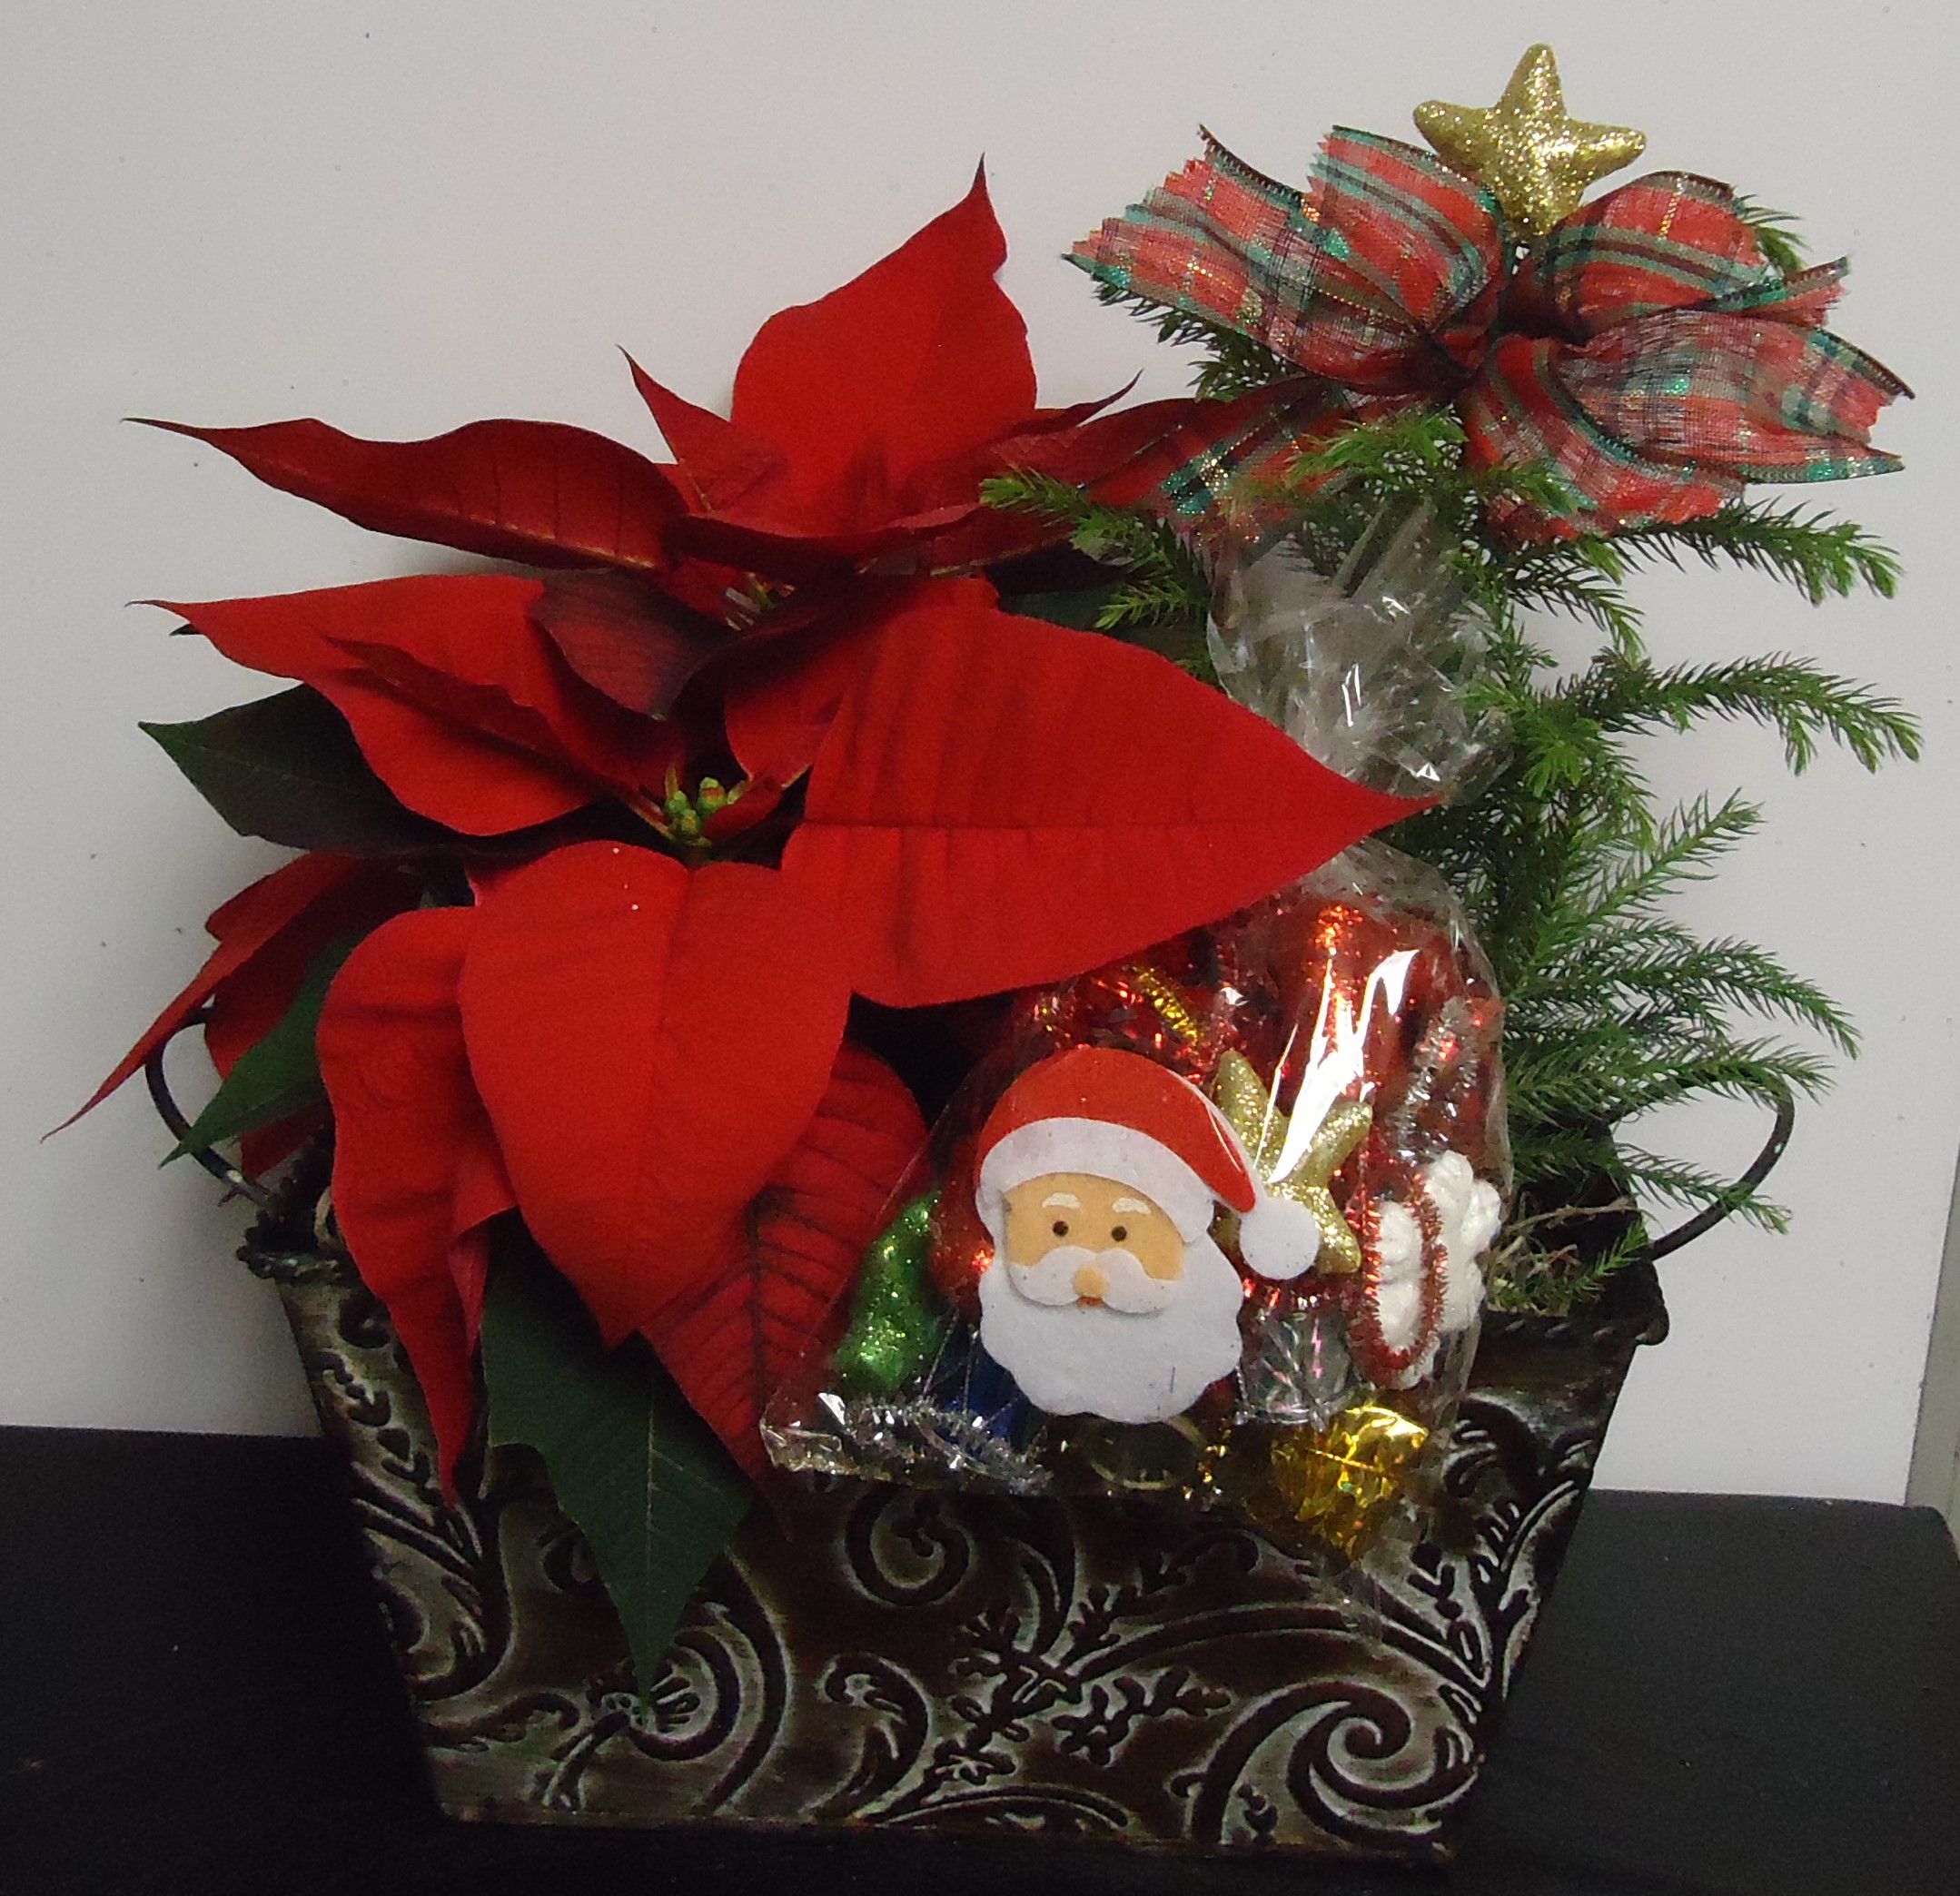 (1) Double Planter
W/ Poinsettia & Pine Tree
(You Can Decorate)
$35.00